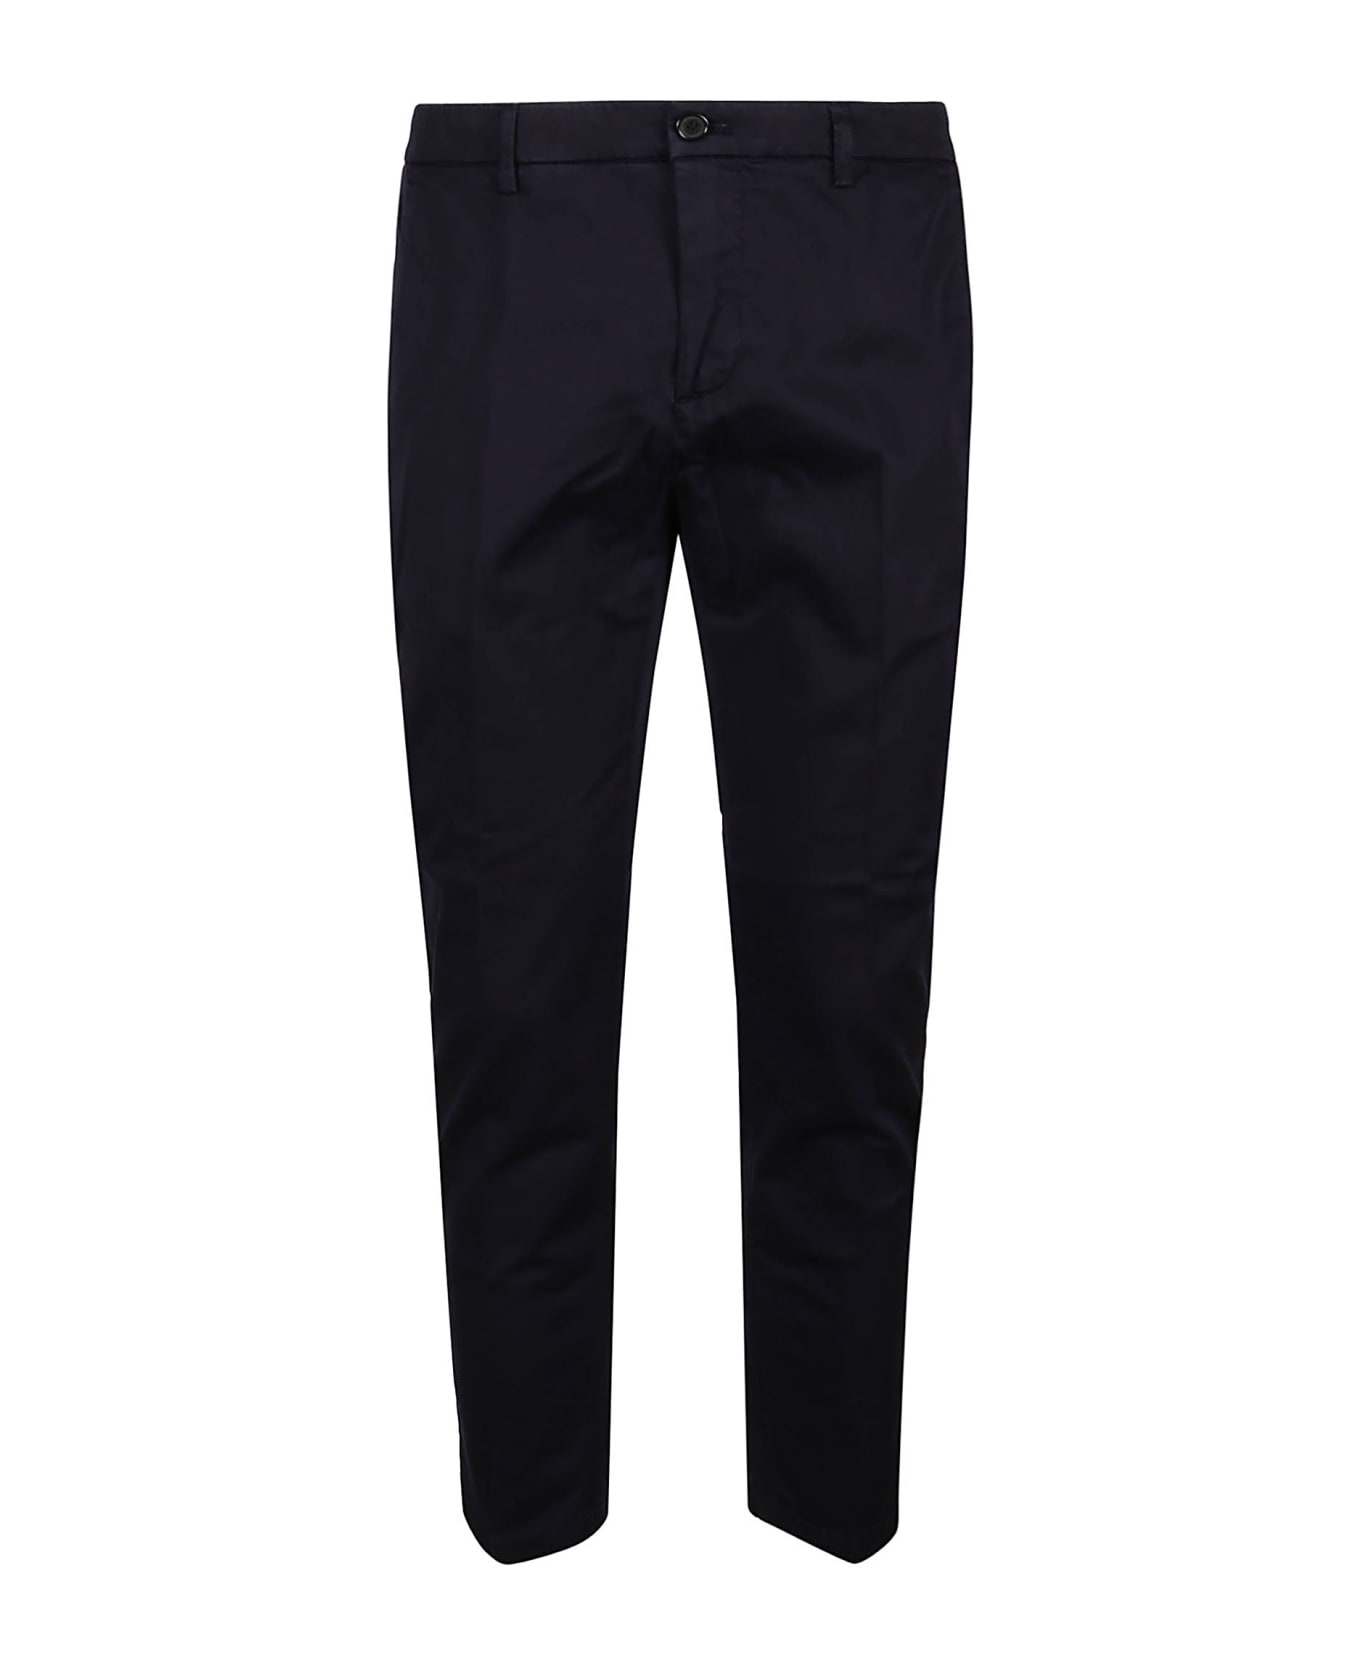 Department Five Cropped Prince Chinos Pant - Navy ボトムス